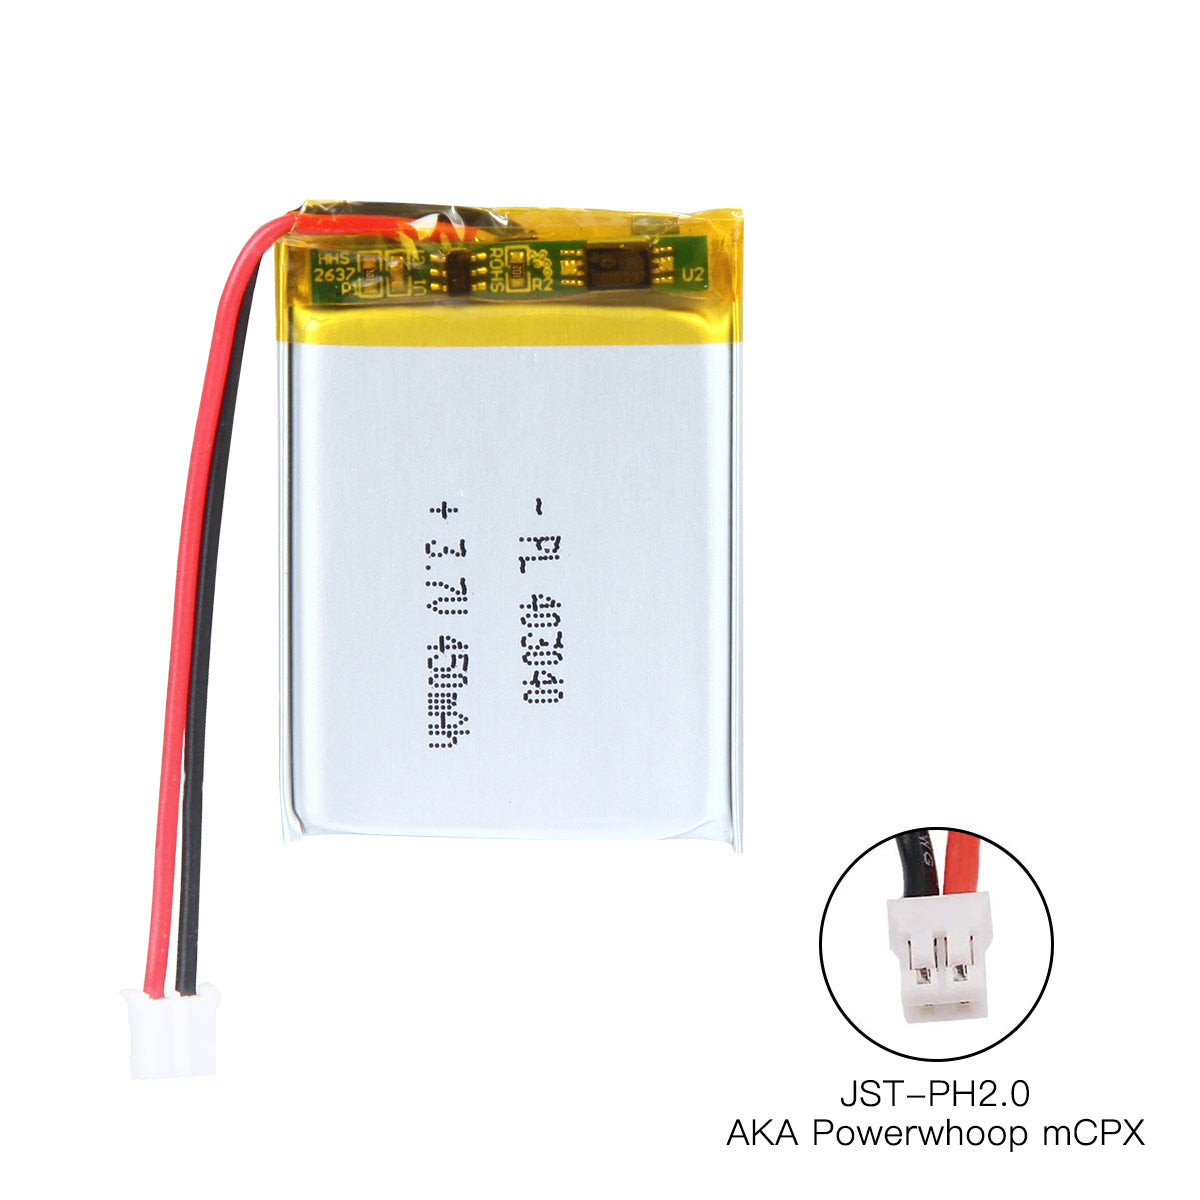 YDL 3.7V 450mAh 403040 Rechargeable Lithium Polymer Battery Length 42mm